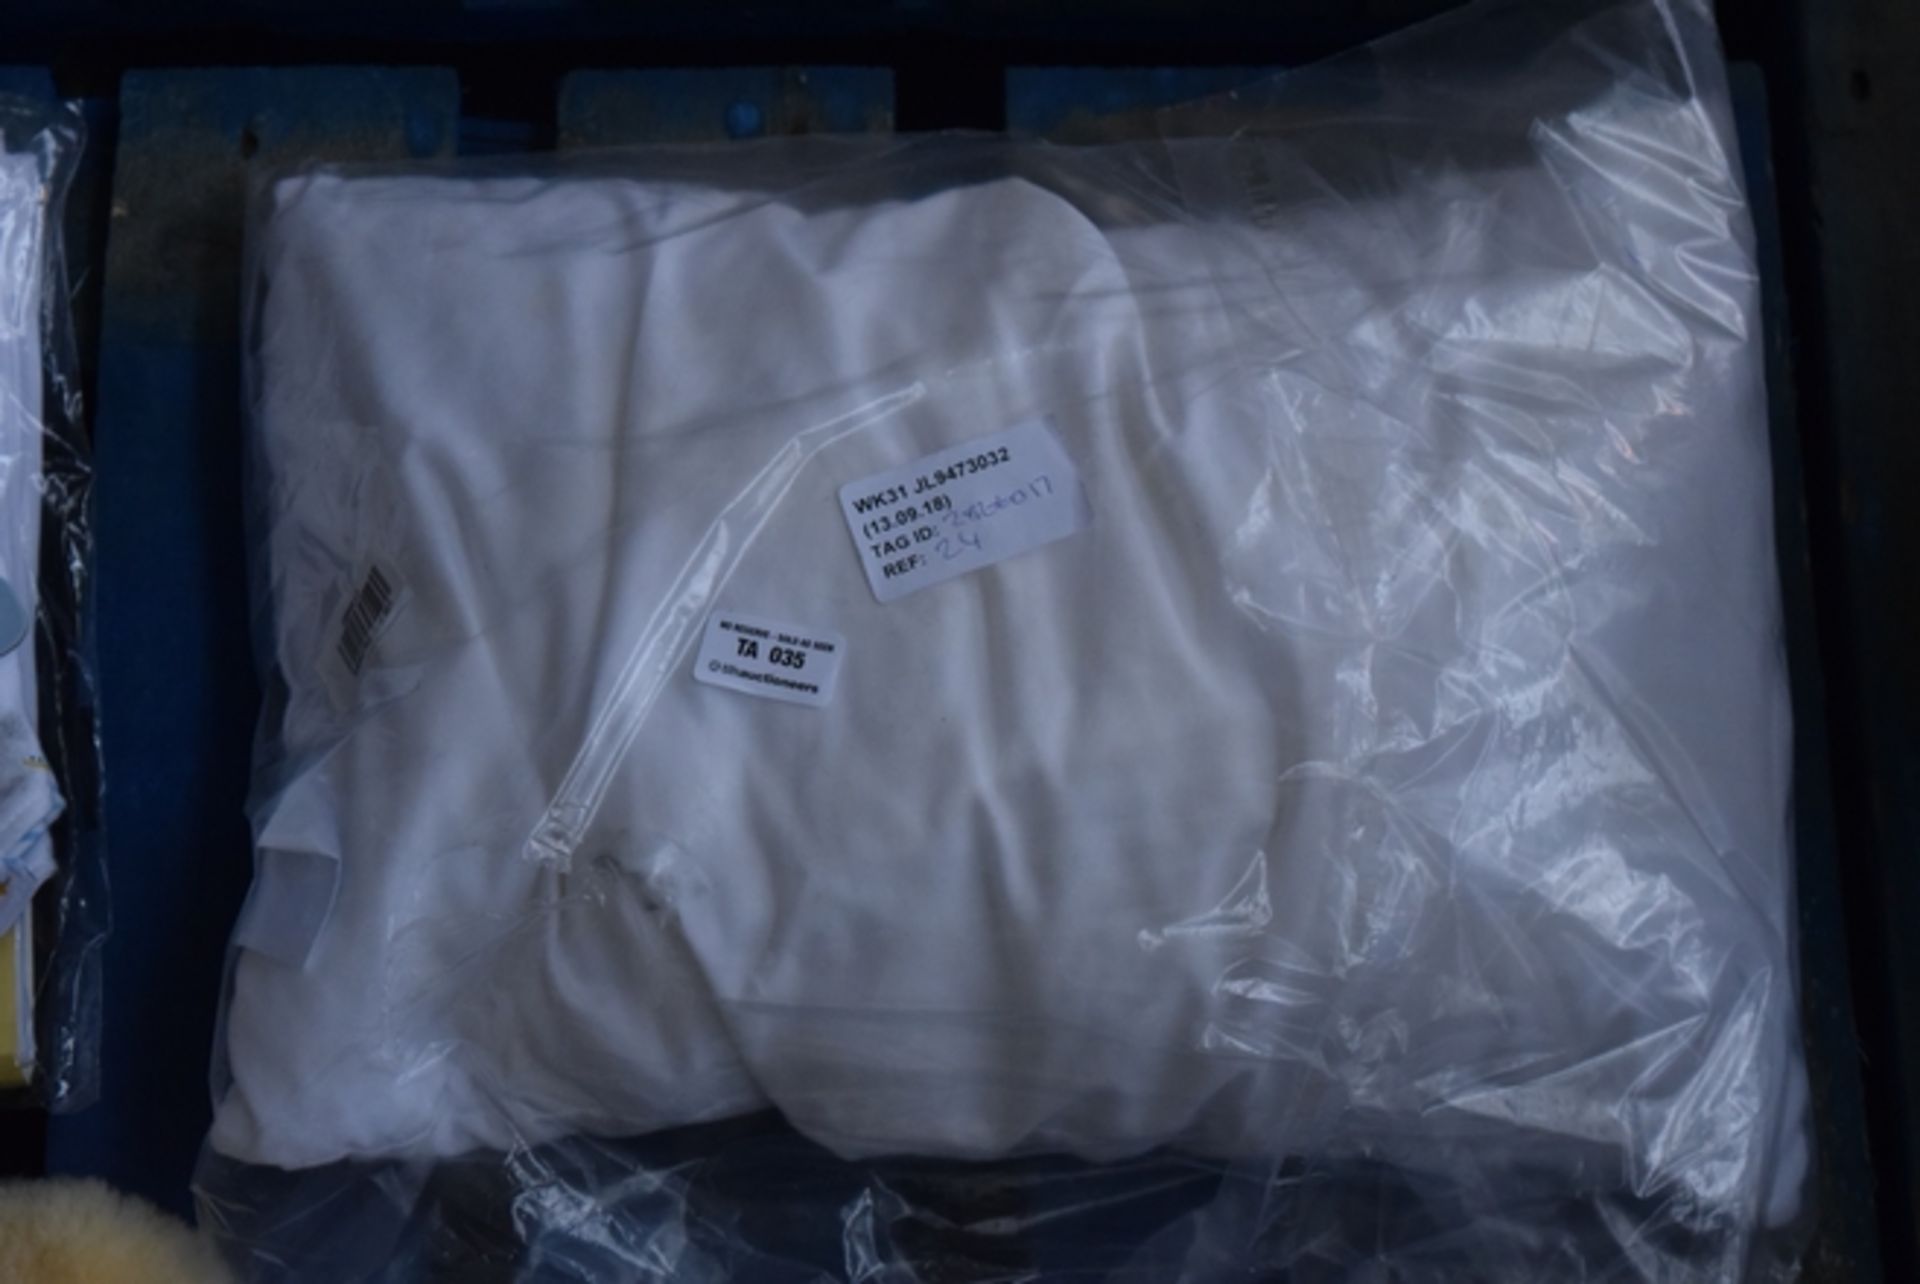 1X COT BED PILLOW (13.09.18) (2866017) (VIEWING AVAILABLE)